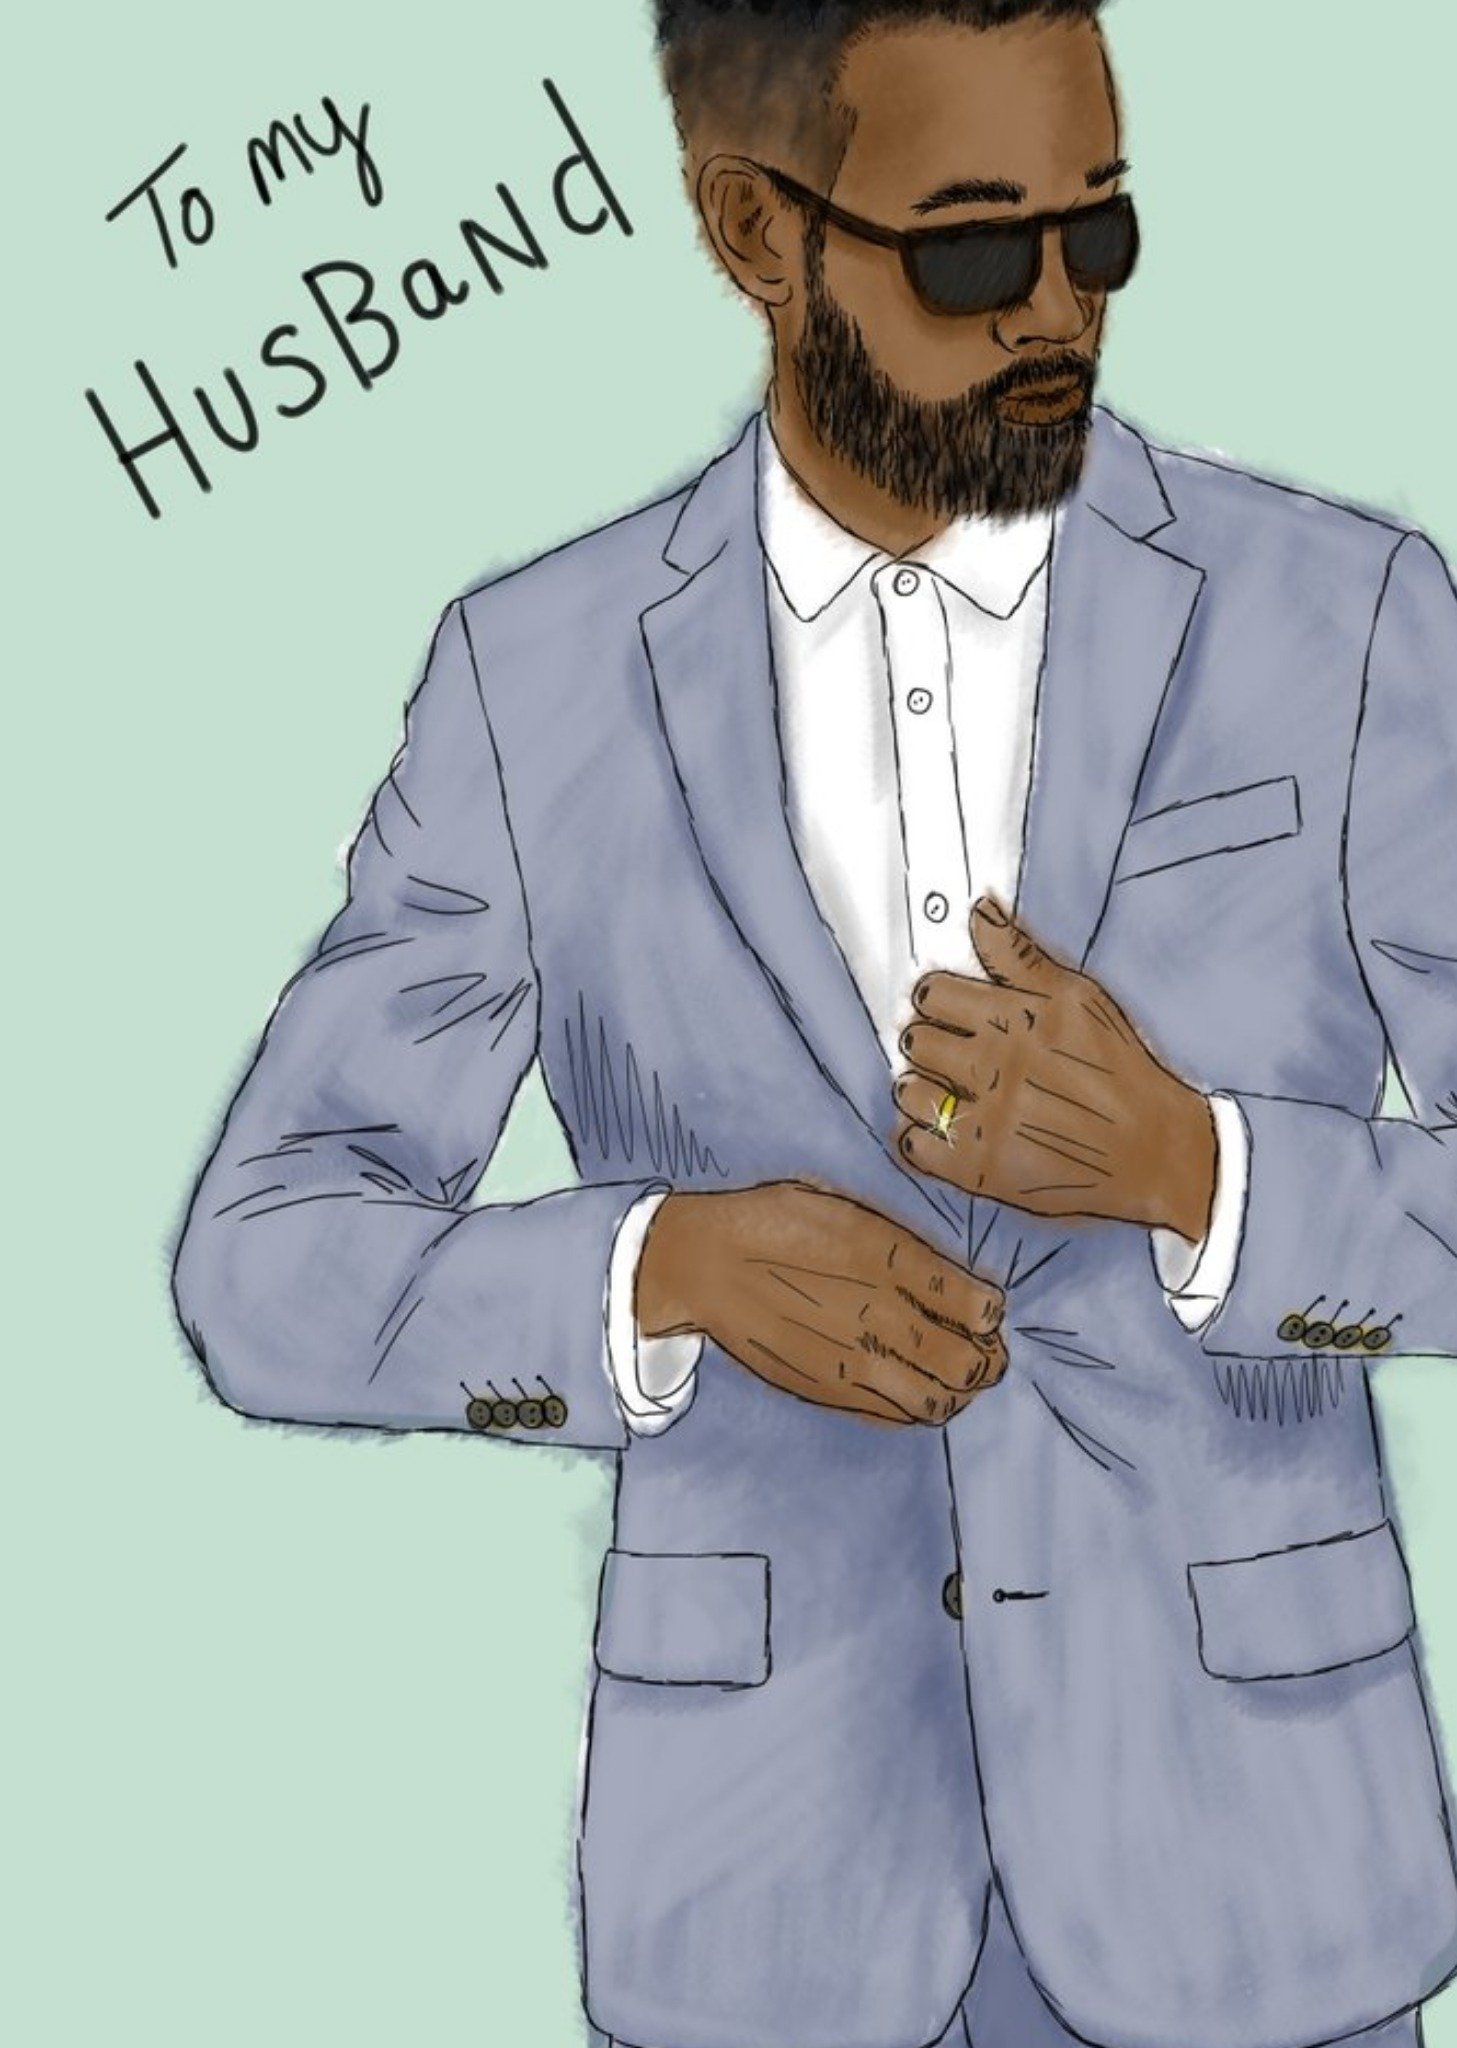 Moonpig Illustration Of A Man Wearing A Suit To My Husband Anniversary Card, Large